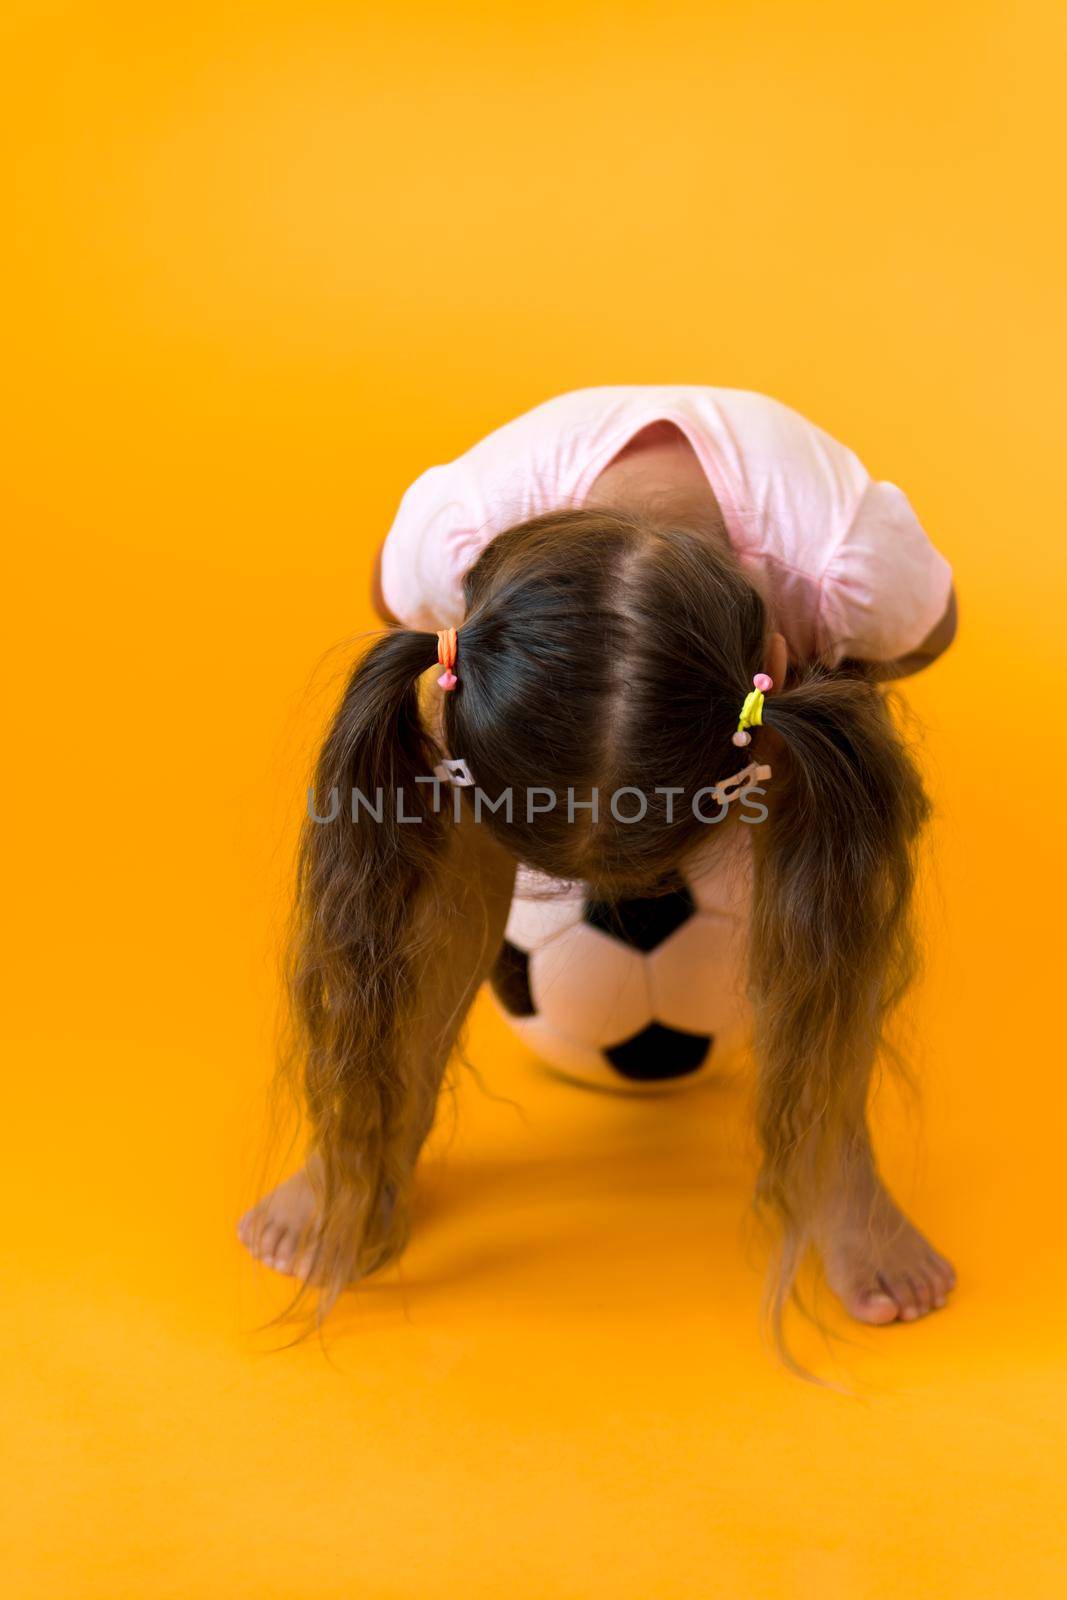 Authentic cute smiling preschool little girl with classic black and white soccer ball look at camera on yellow background. child play football in t-shirt and shorts. Sport, championship, team concept.